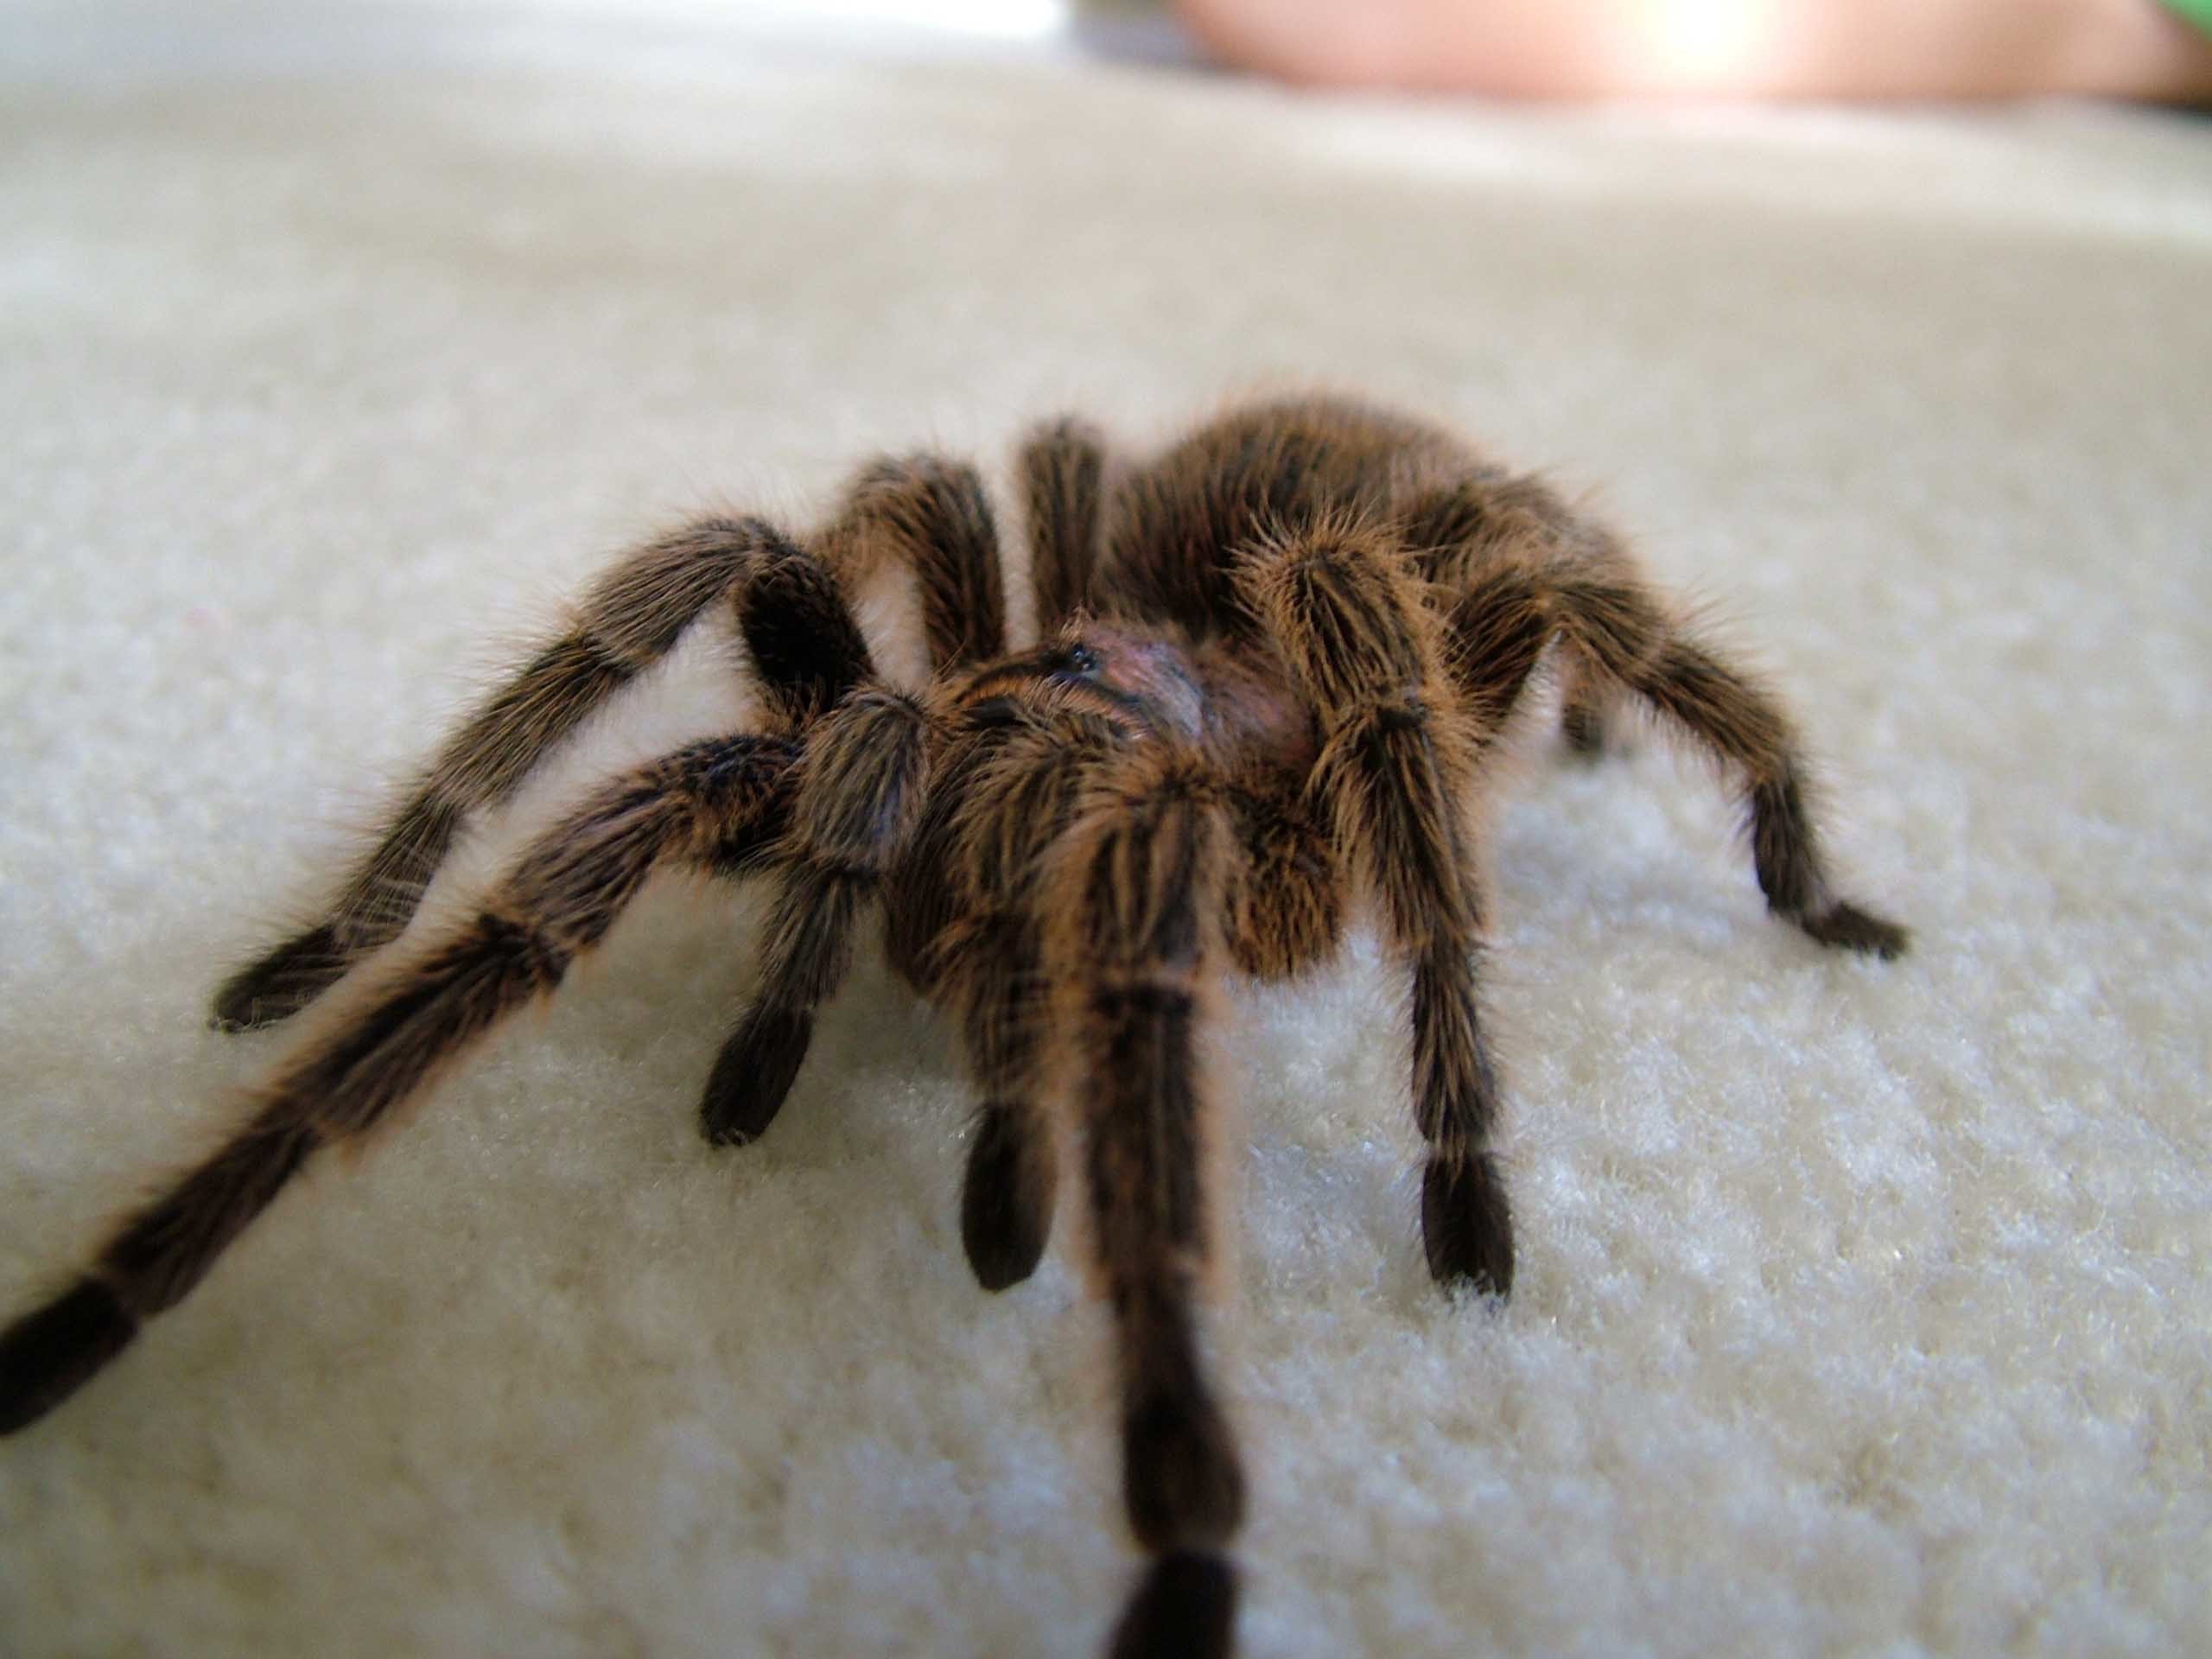 Scary Spider Moving Hd Wallpapers Daily Backgrounds - Many Eyes Does A Tarantula Have - HD Wallpaper 